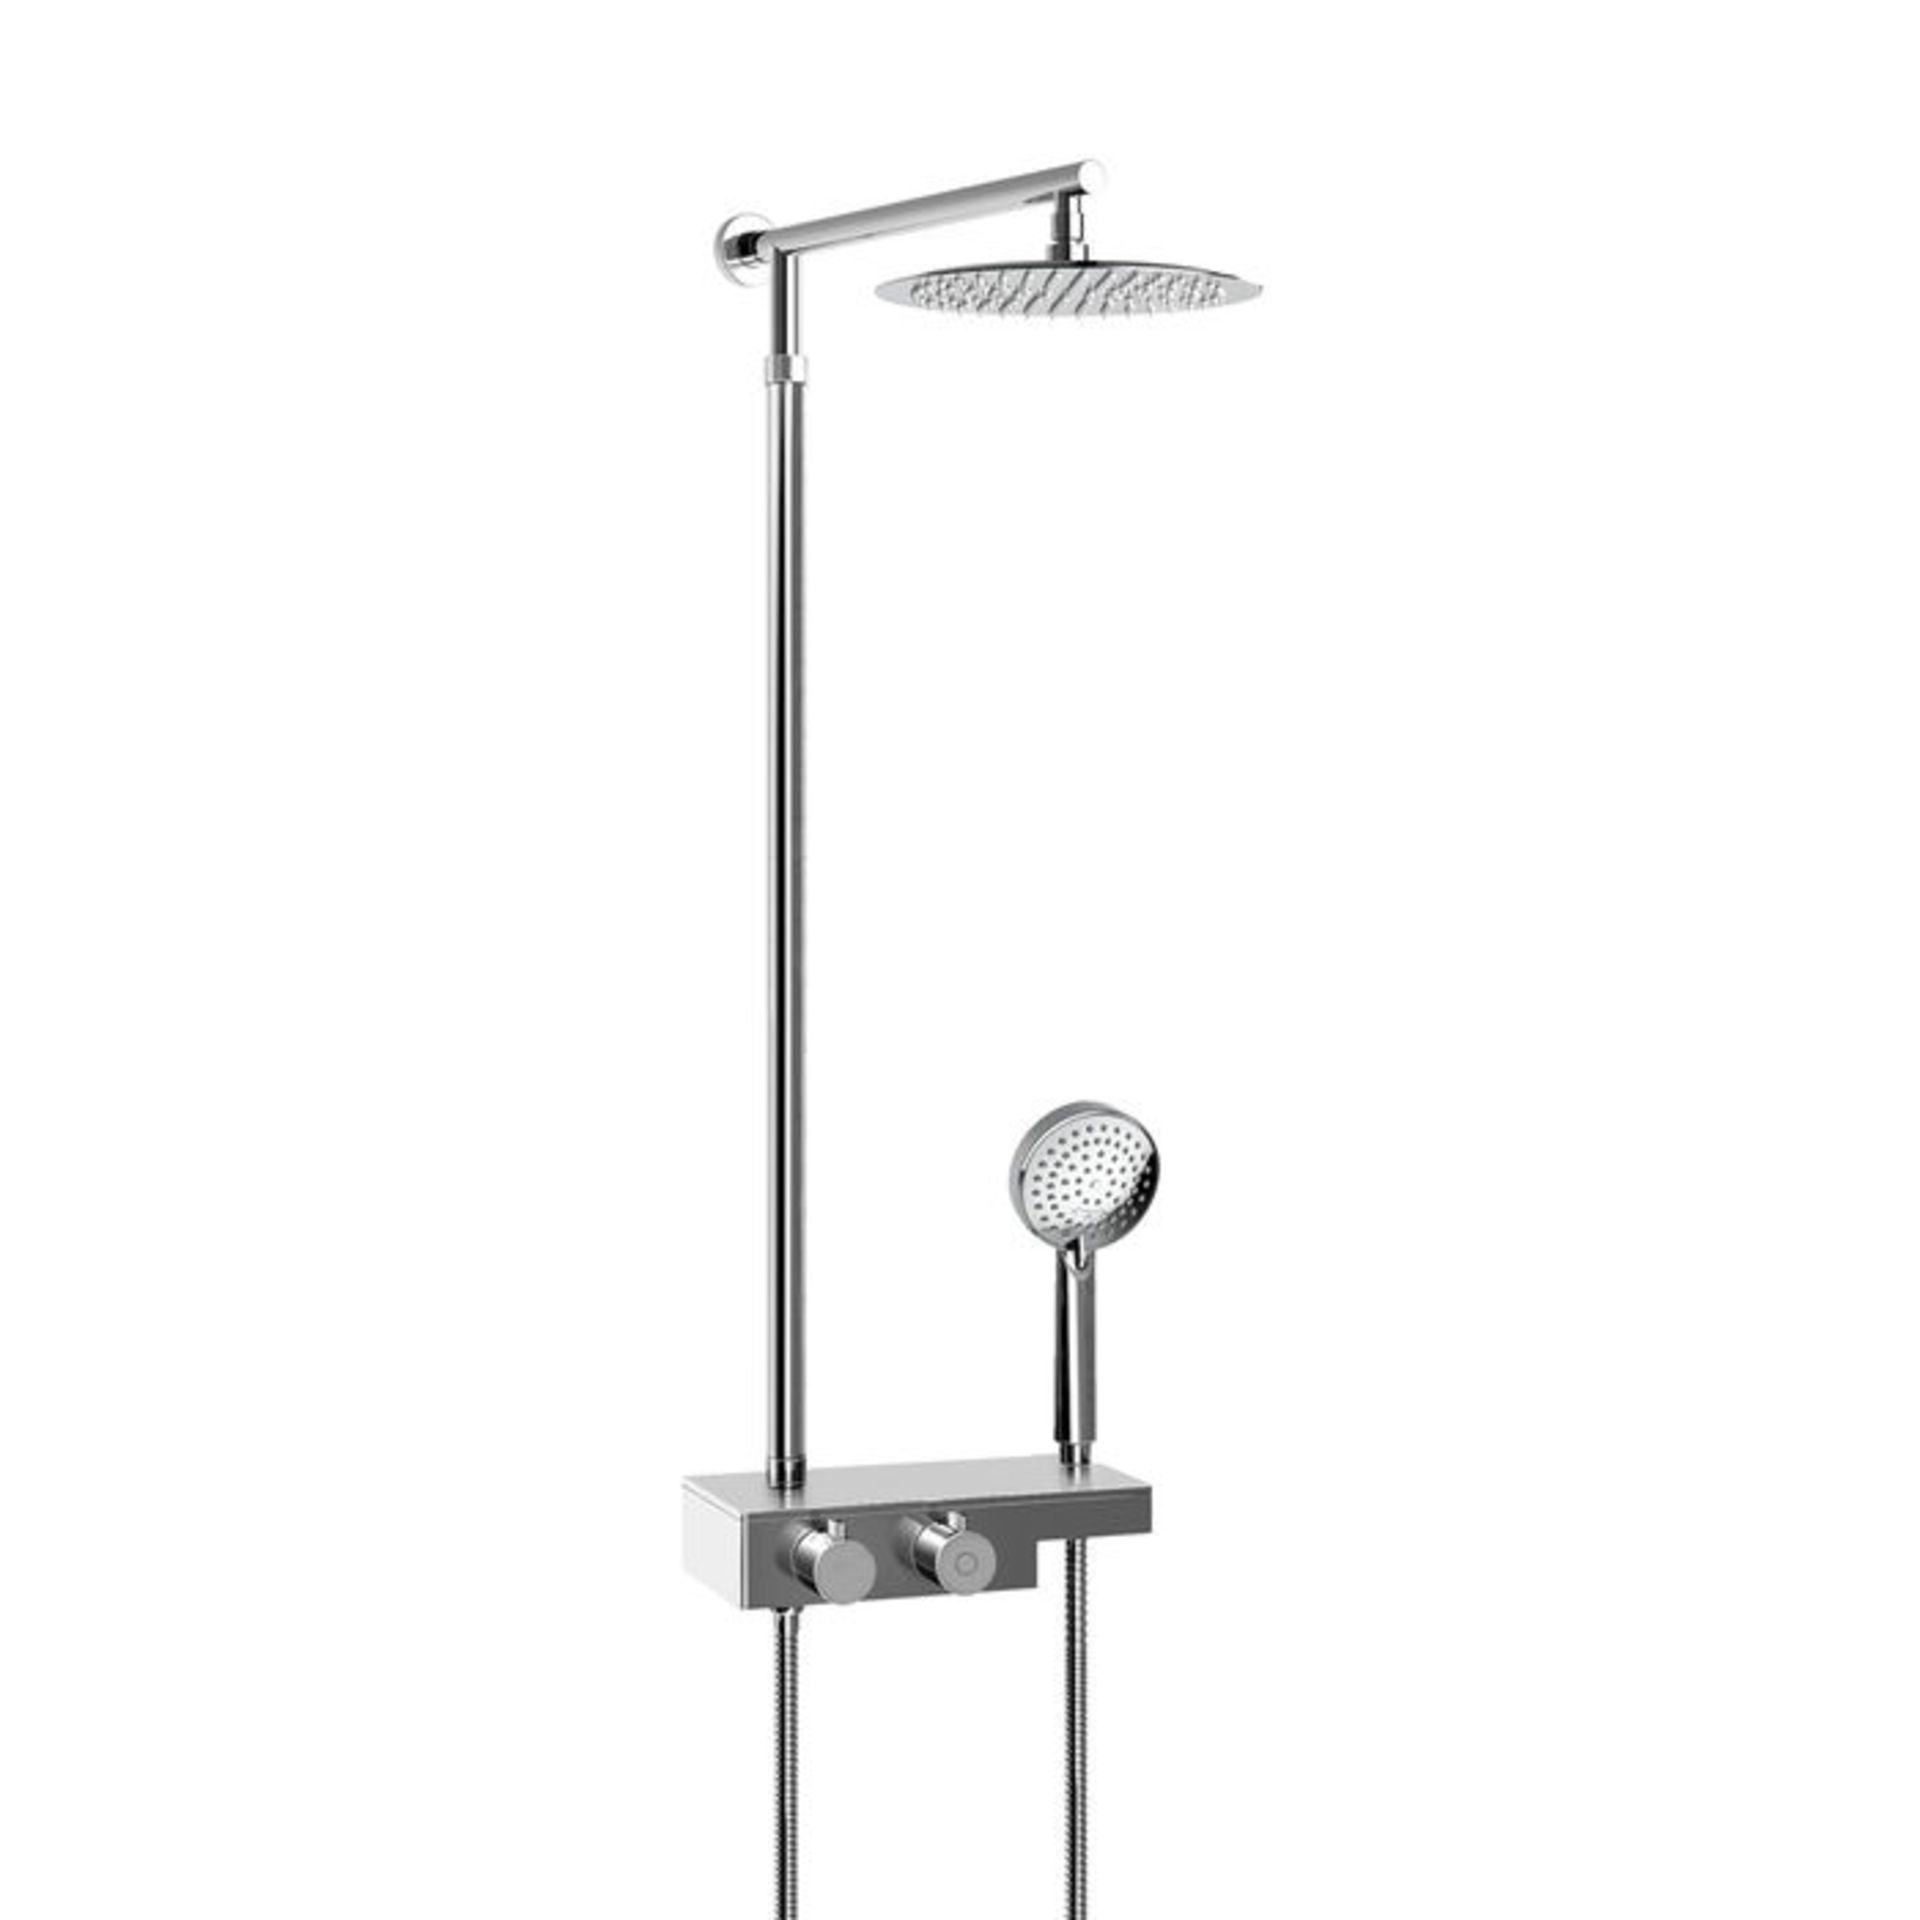 (ZL208) Round Exposed Thermostatic Mixer Shower Kit & Large Head. RRP £349.99. Cool to touch - Image 2 of 4